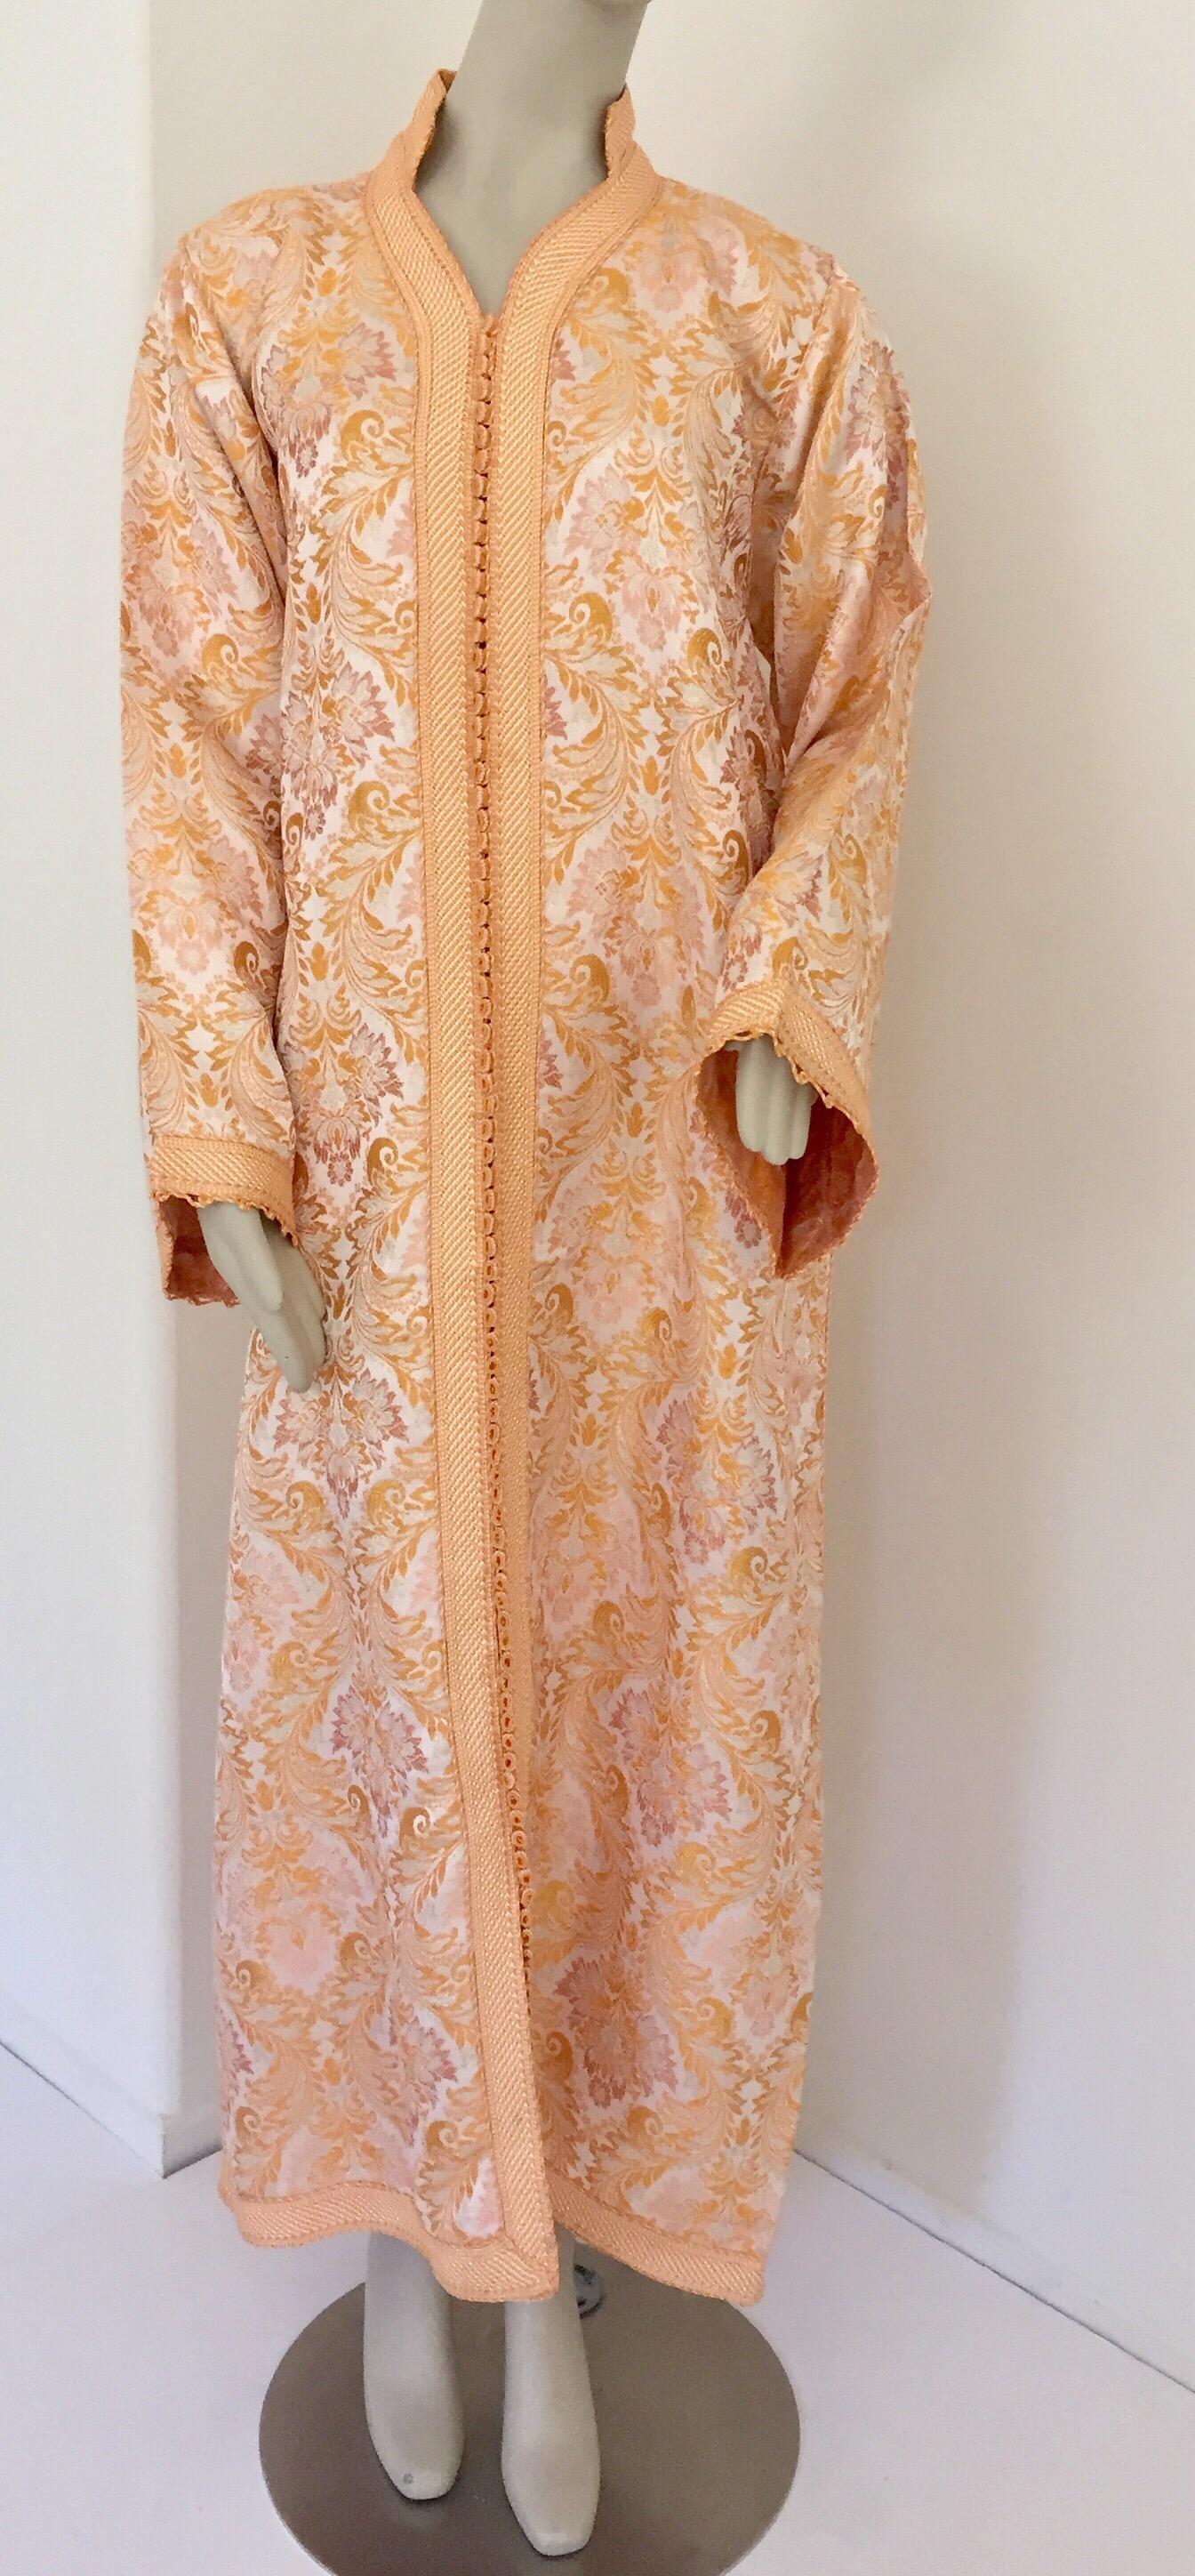 Hand-Crafted Moroccan Caftan in Gold Brocade